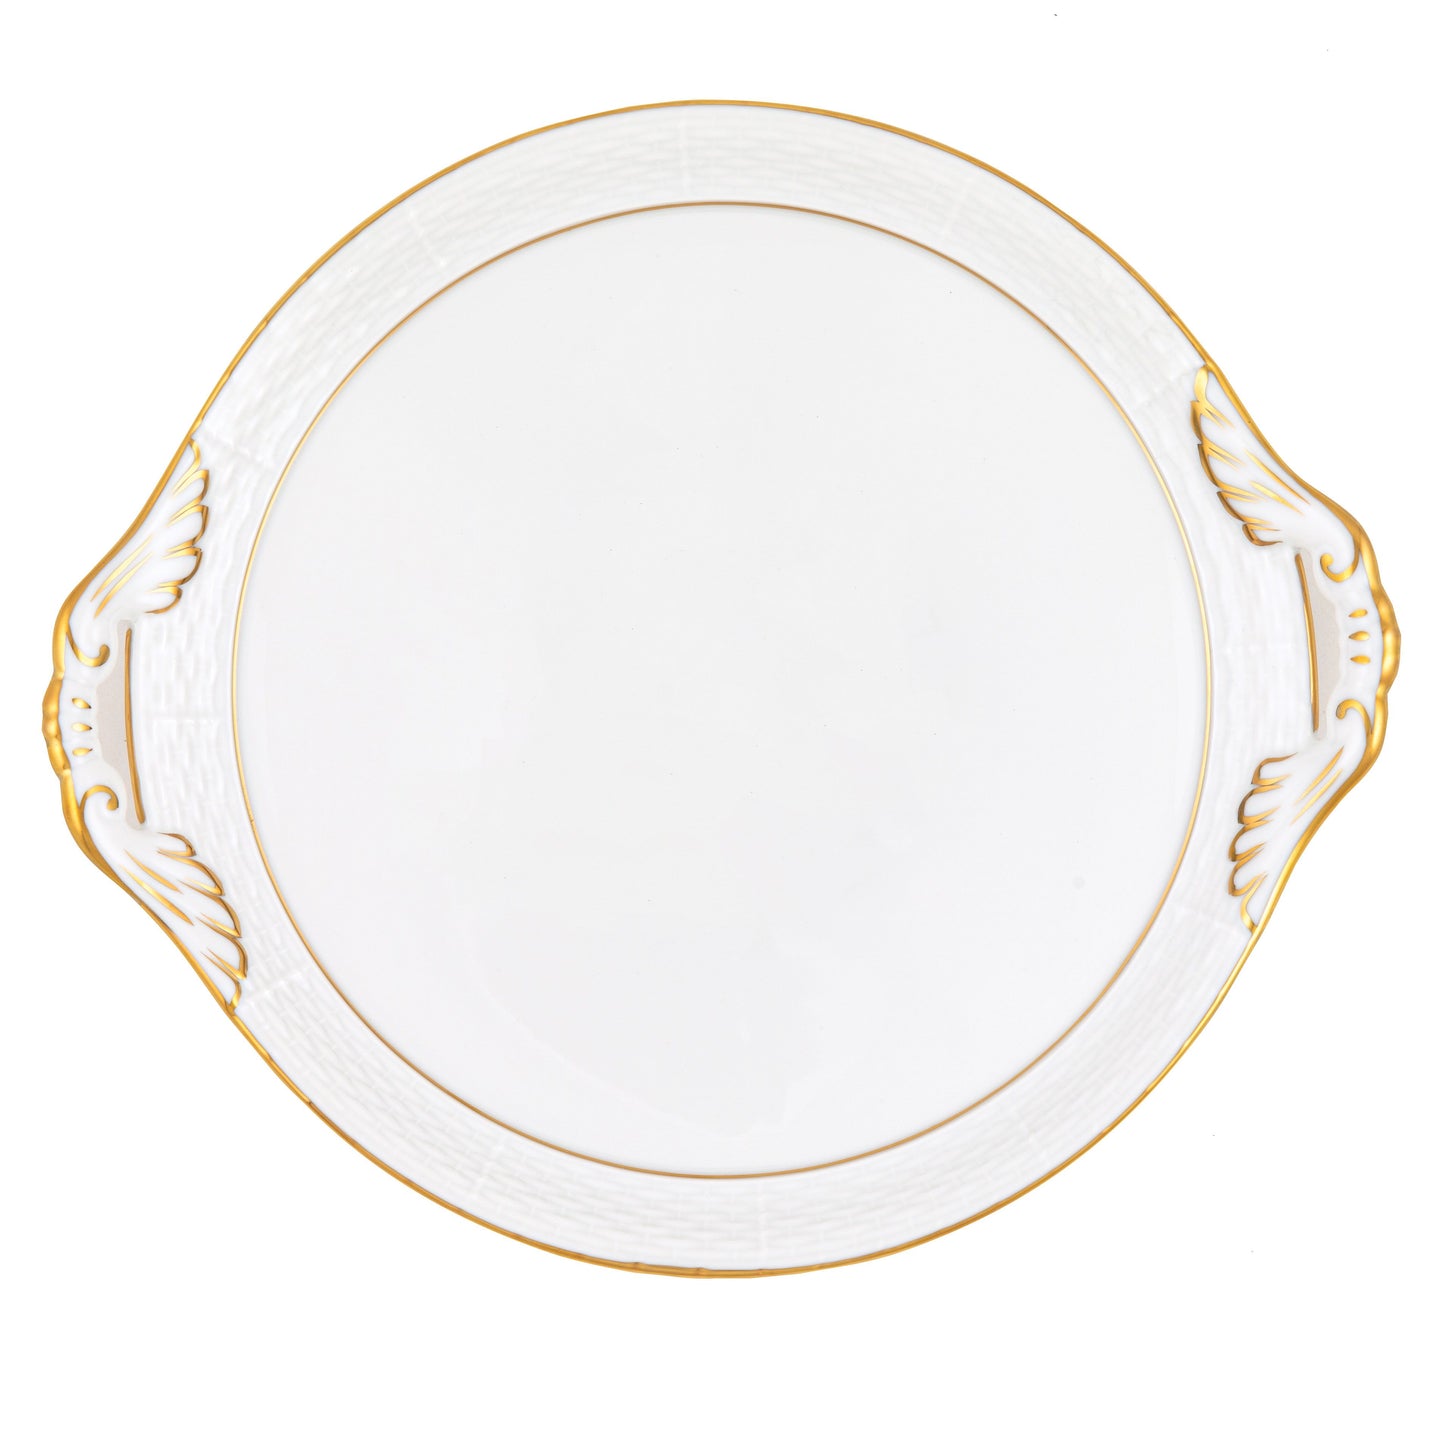 Herend China Golden Edge Round Tray with Handles